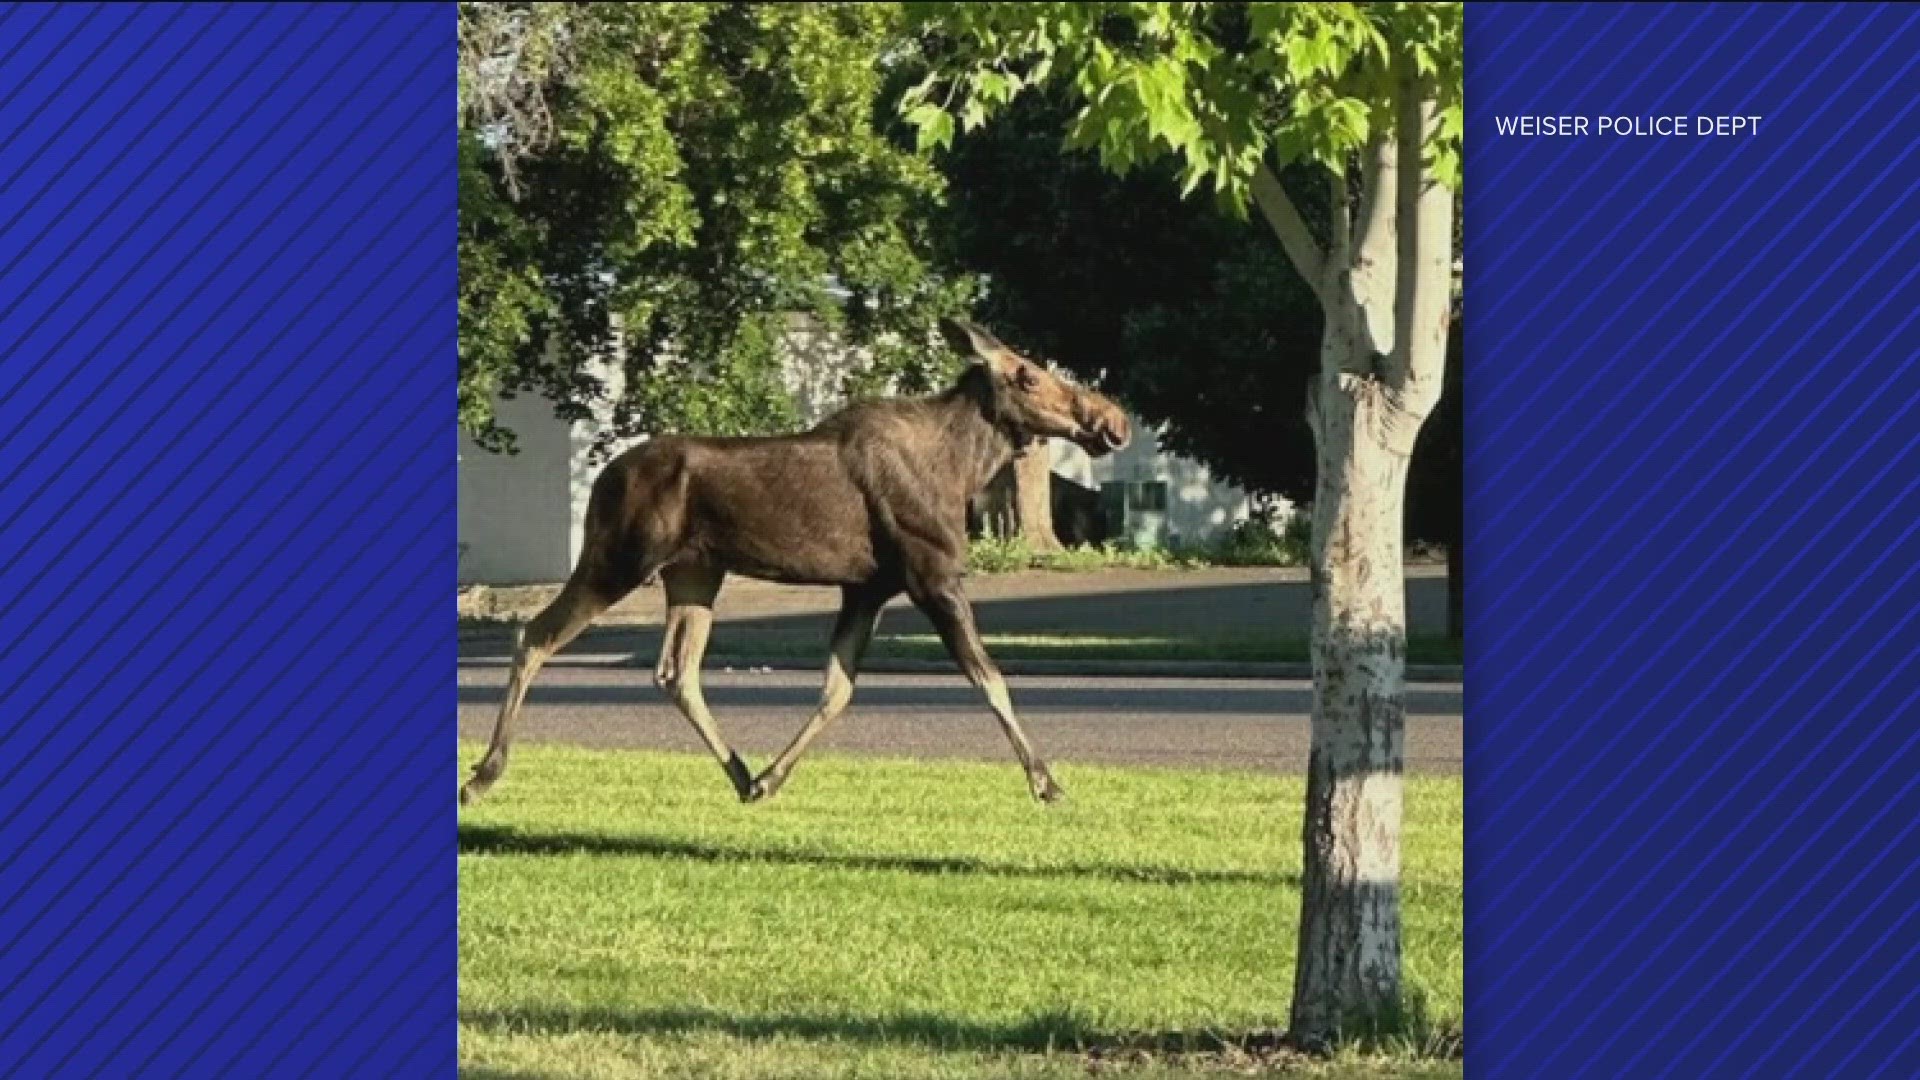 spotted moose